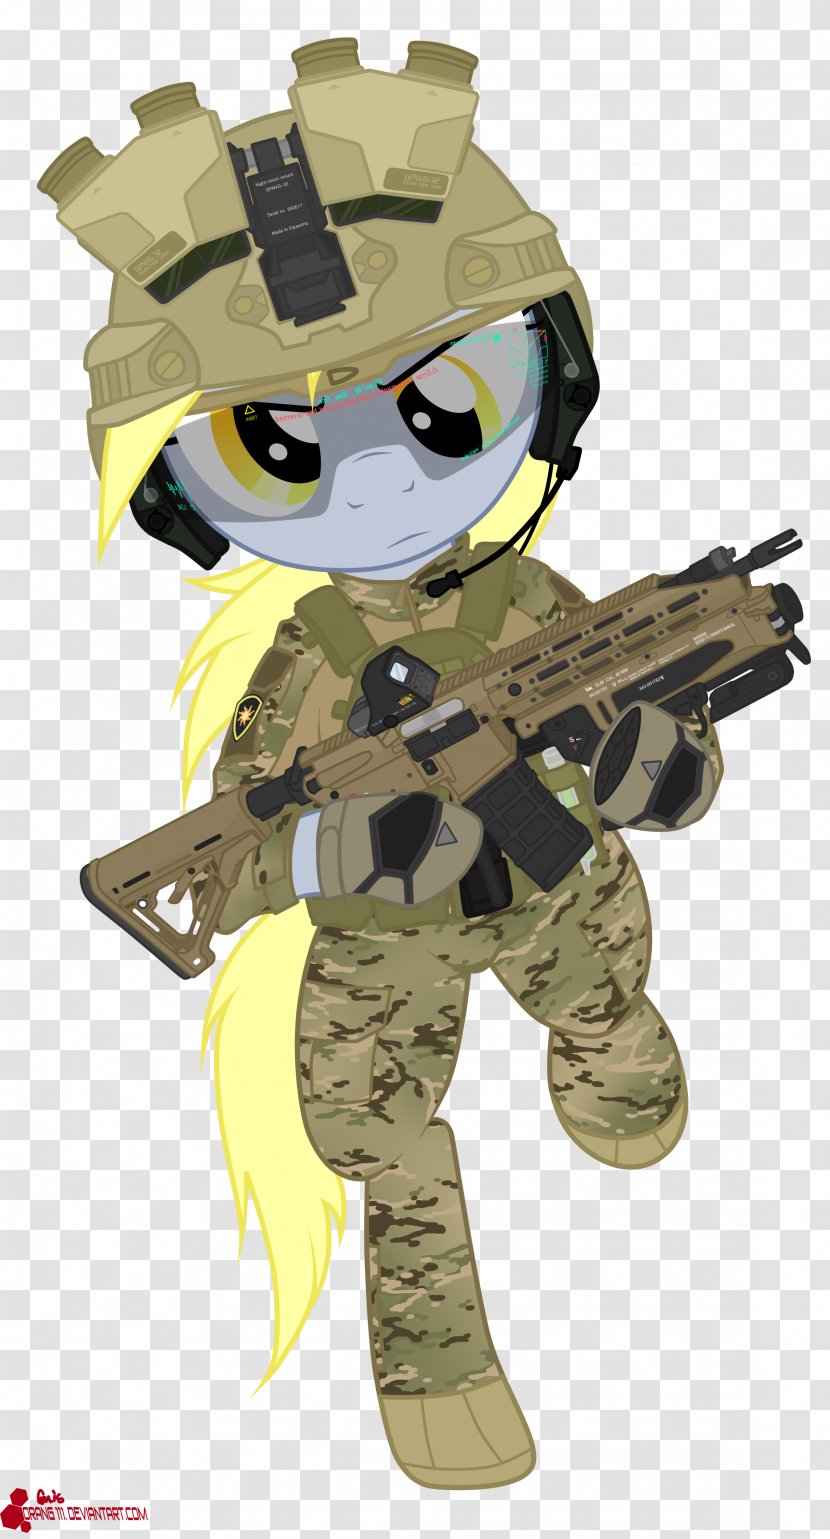 Derpy Hooves Pony Firearm Army - Mythical Creature - Soldier Transparent PNG